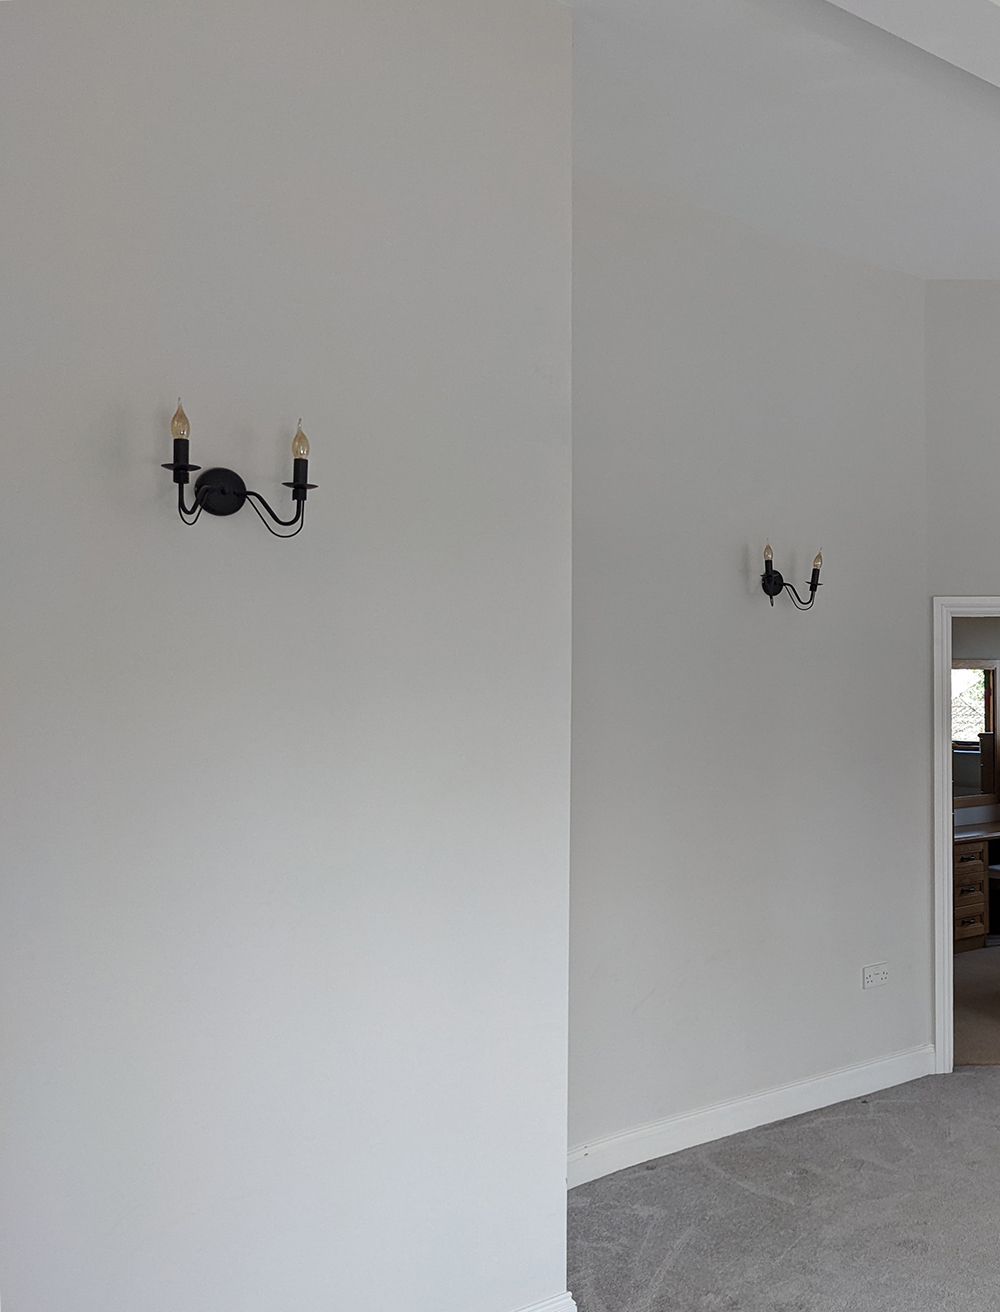 A before photo showing the old wall lights which were small and black.